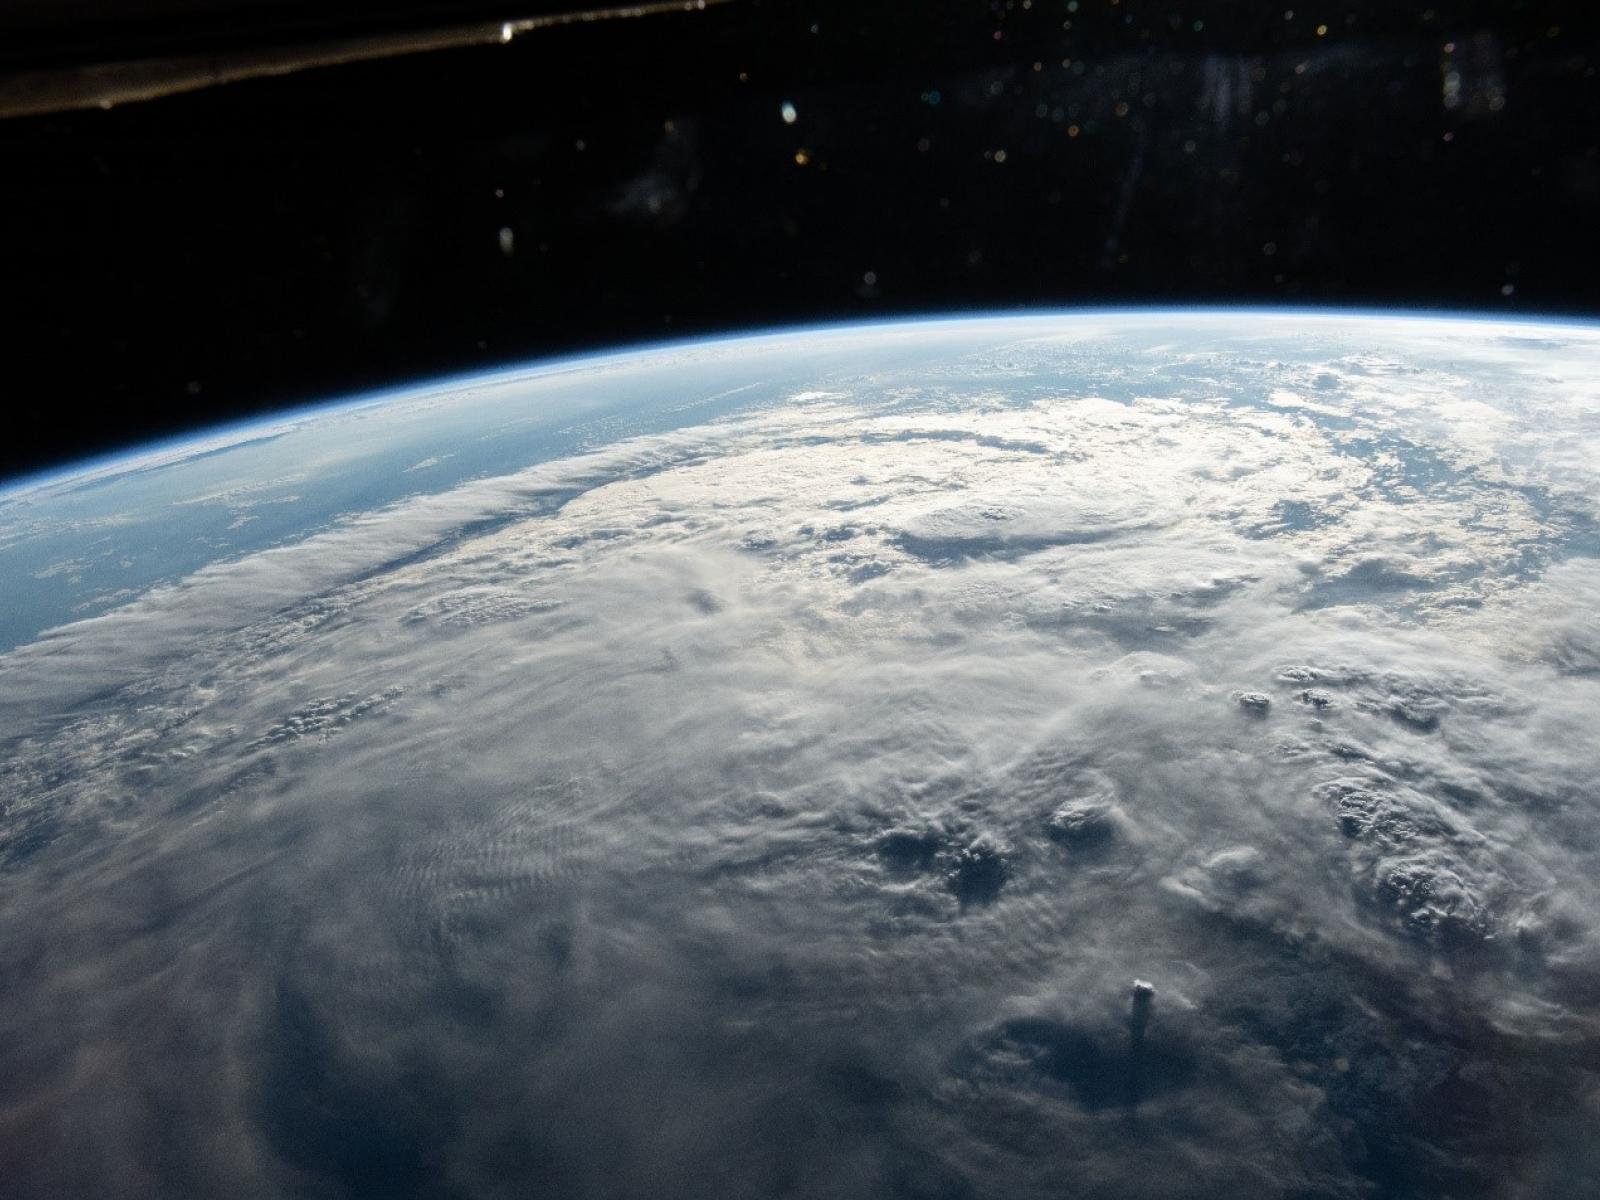 Photograph of tropical cyclone clouds from space